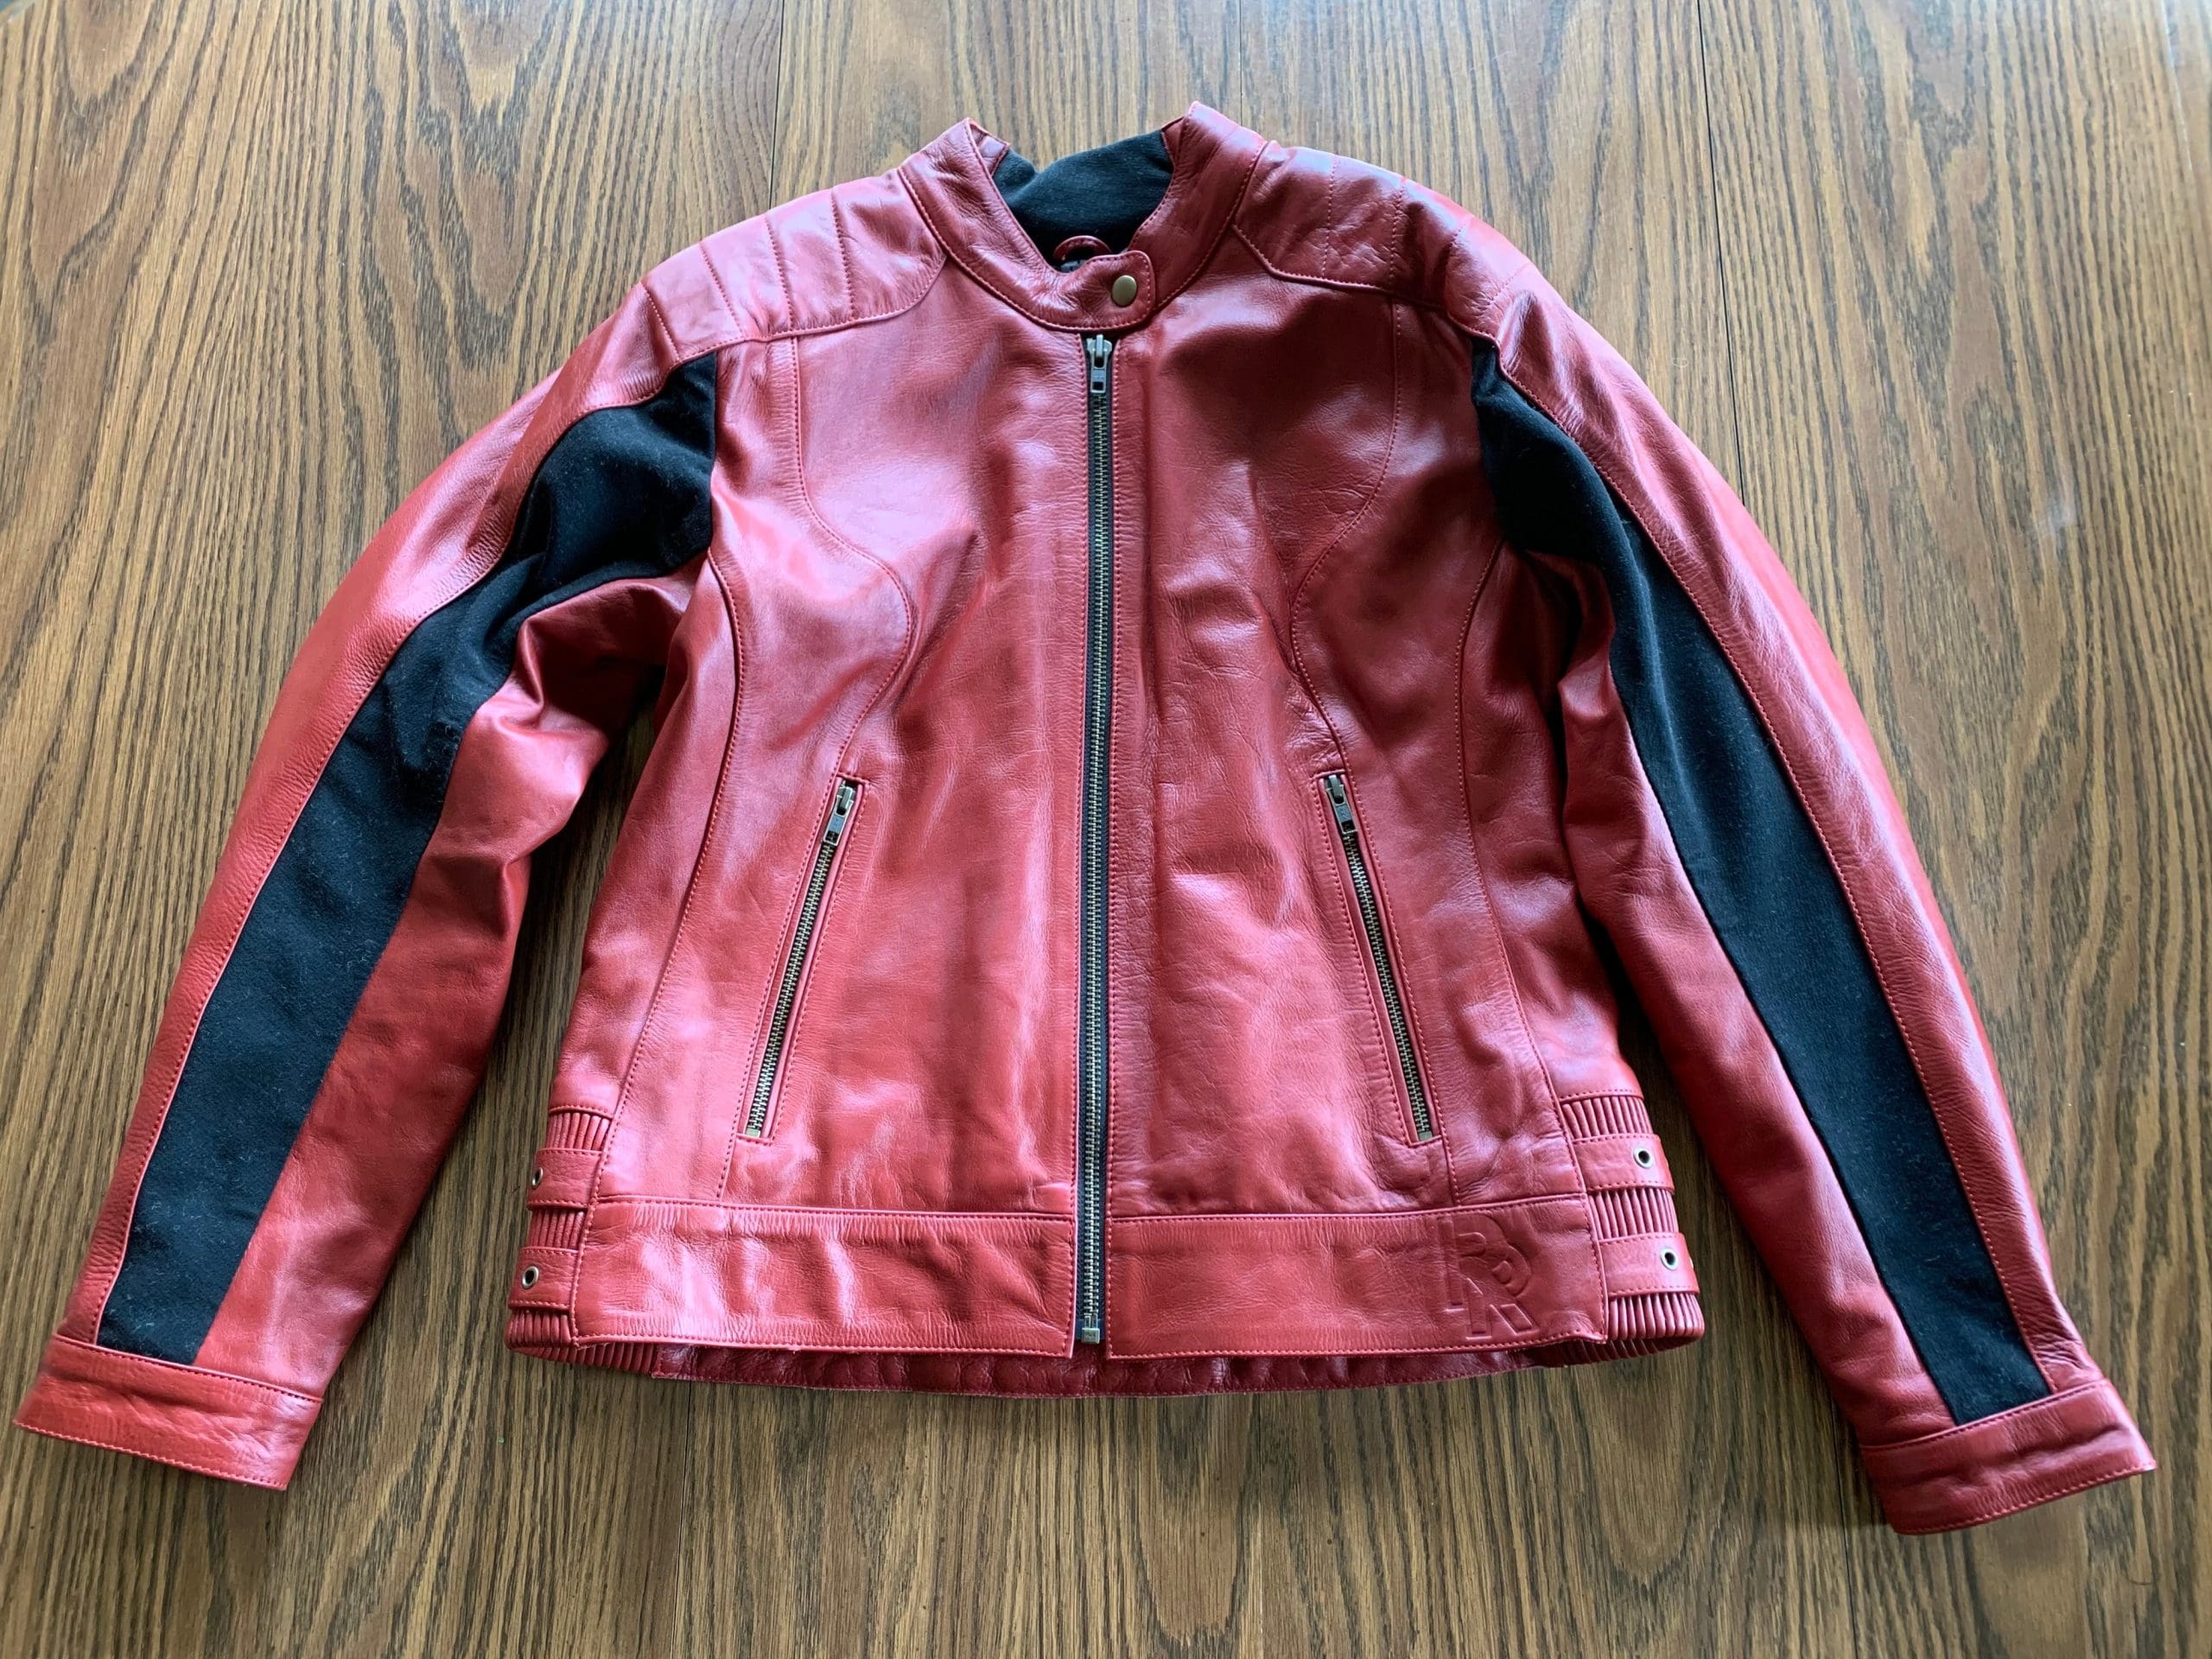 Front view of Phoenix jacket on table